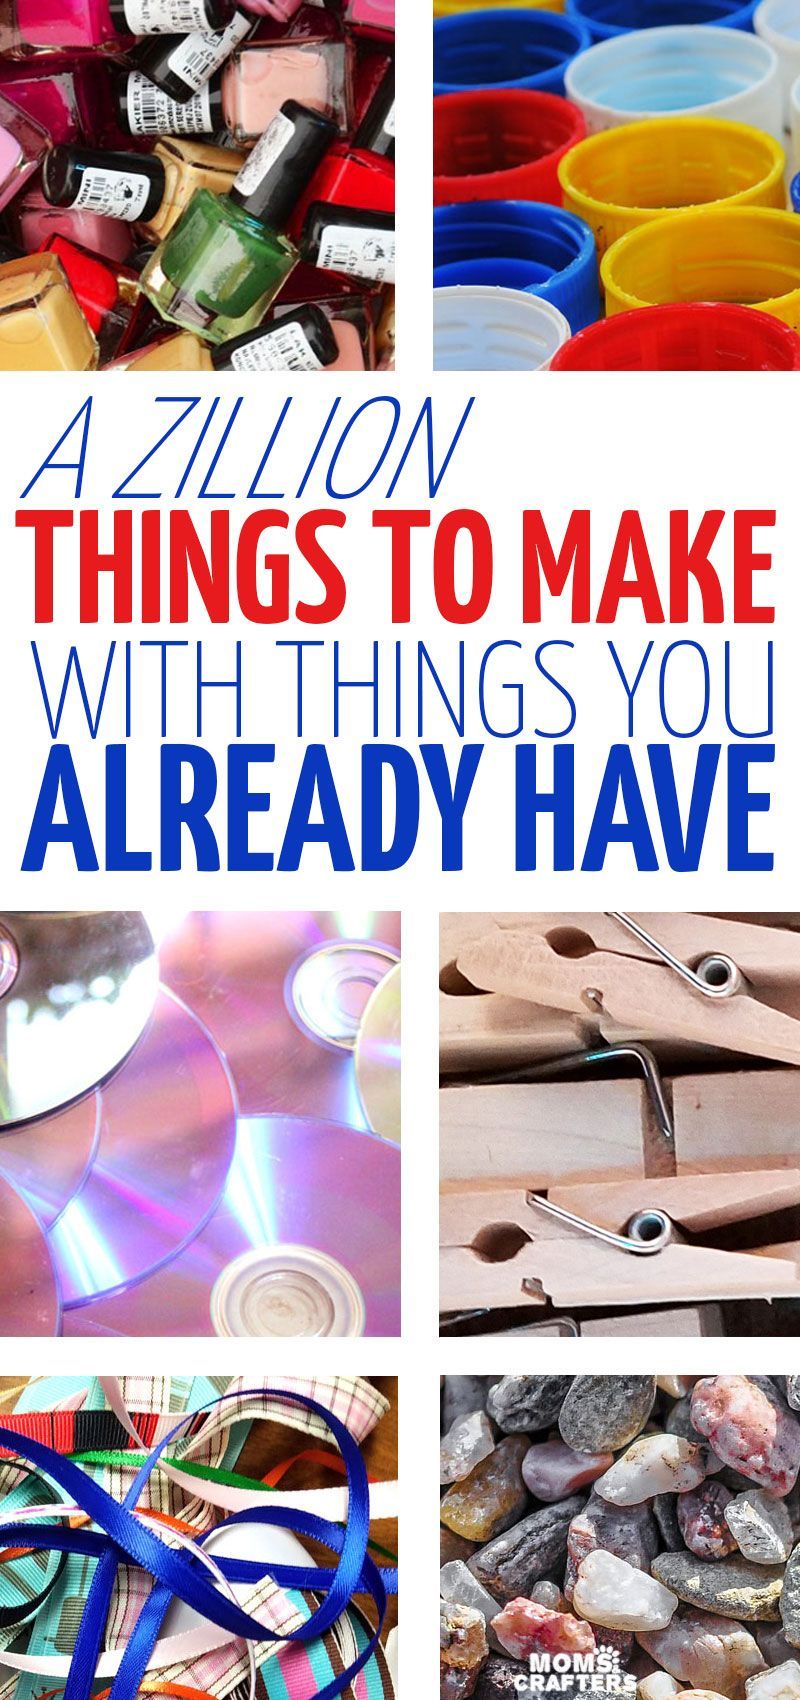 A Zillion things to make -   16 diy projects school ideas